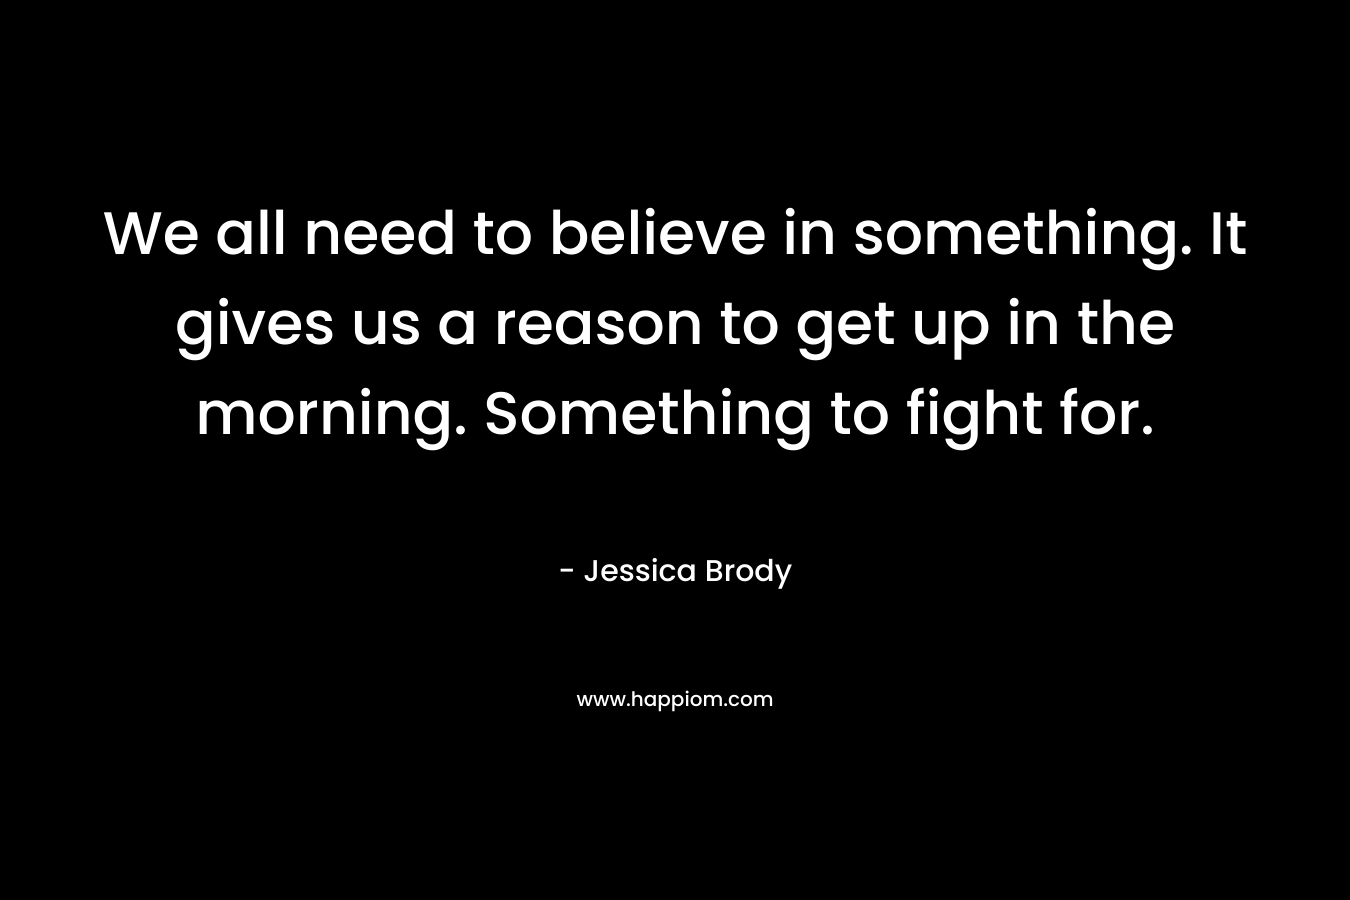 We all need to believe in something. It gives us a reason to get up in the morning. Something to fight for.